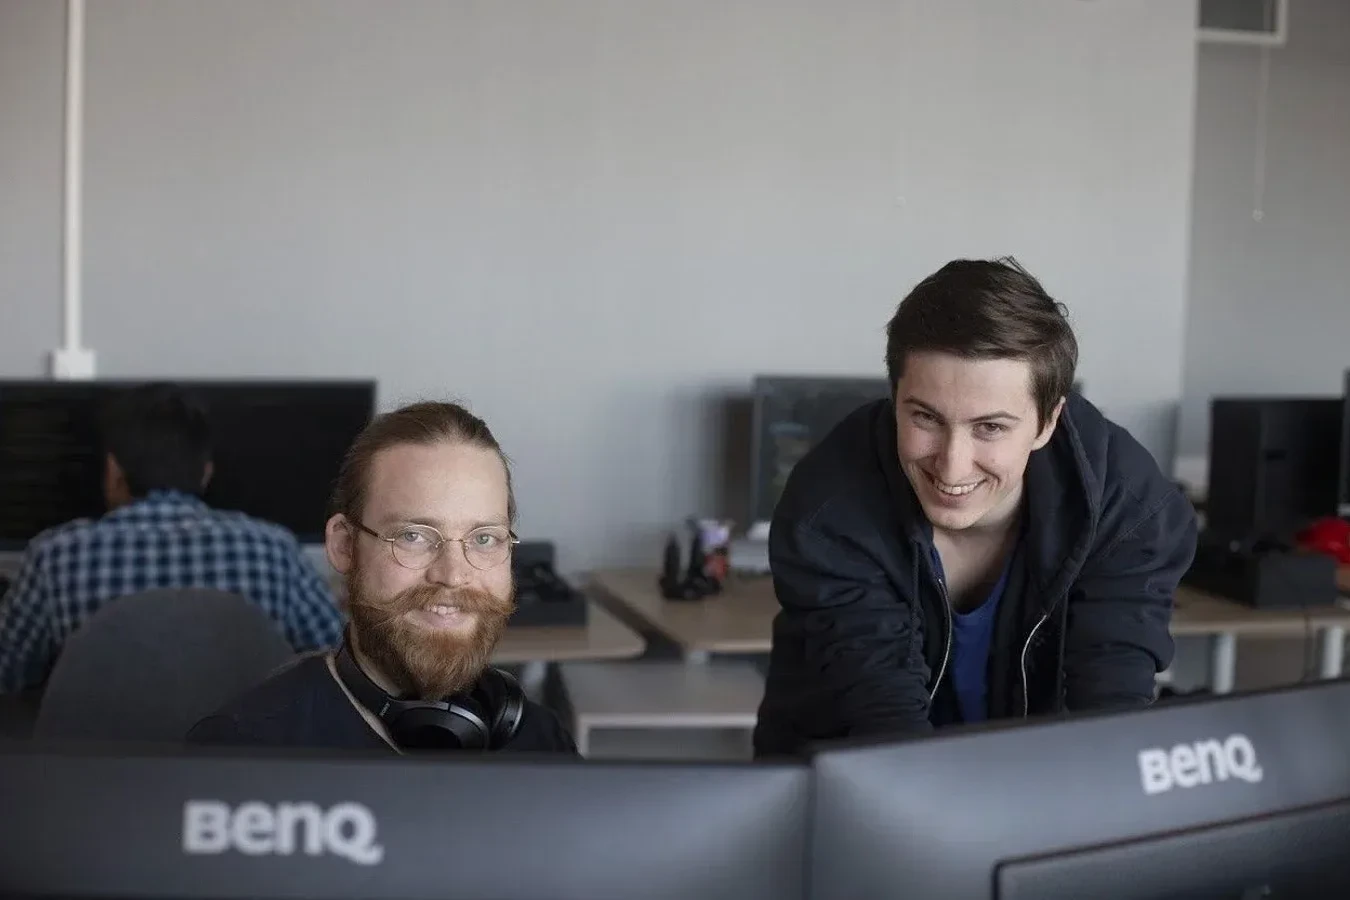 two employees at breach working together on the computer